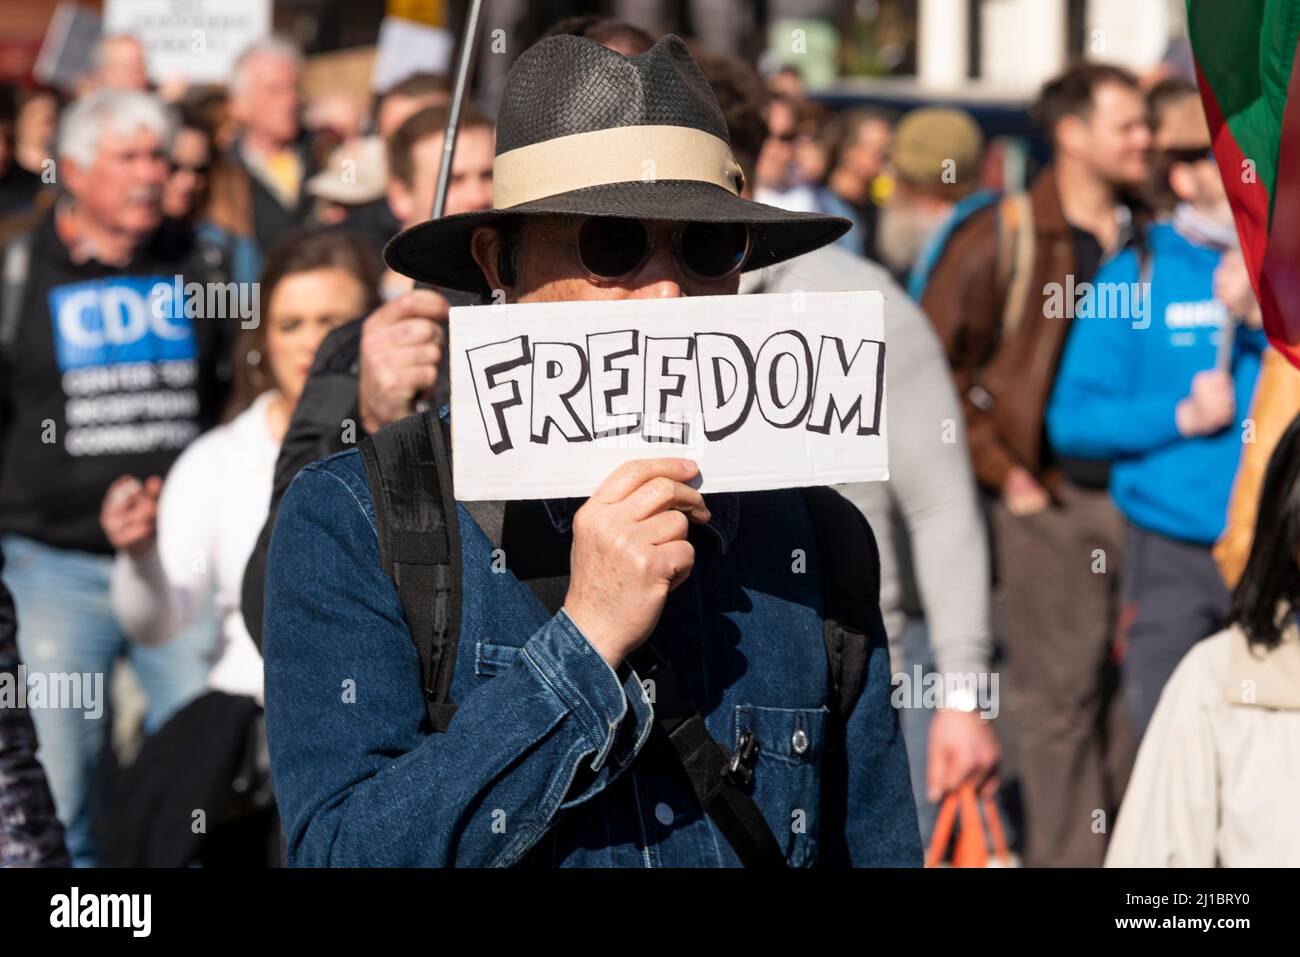 Freedom. Protester with freedom on a placard, protesting the online safety bill, referring to freedom of speech Stock Photo